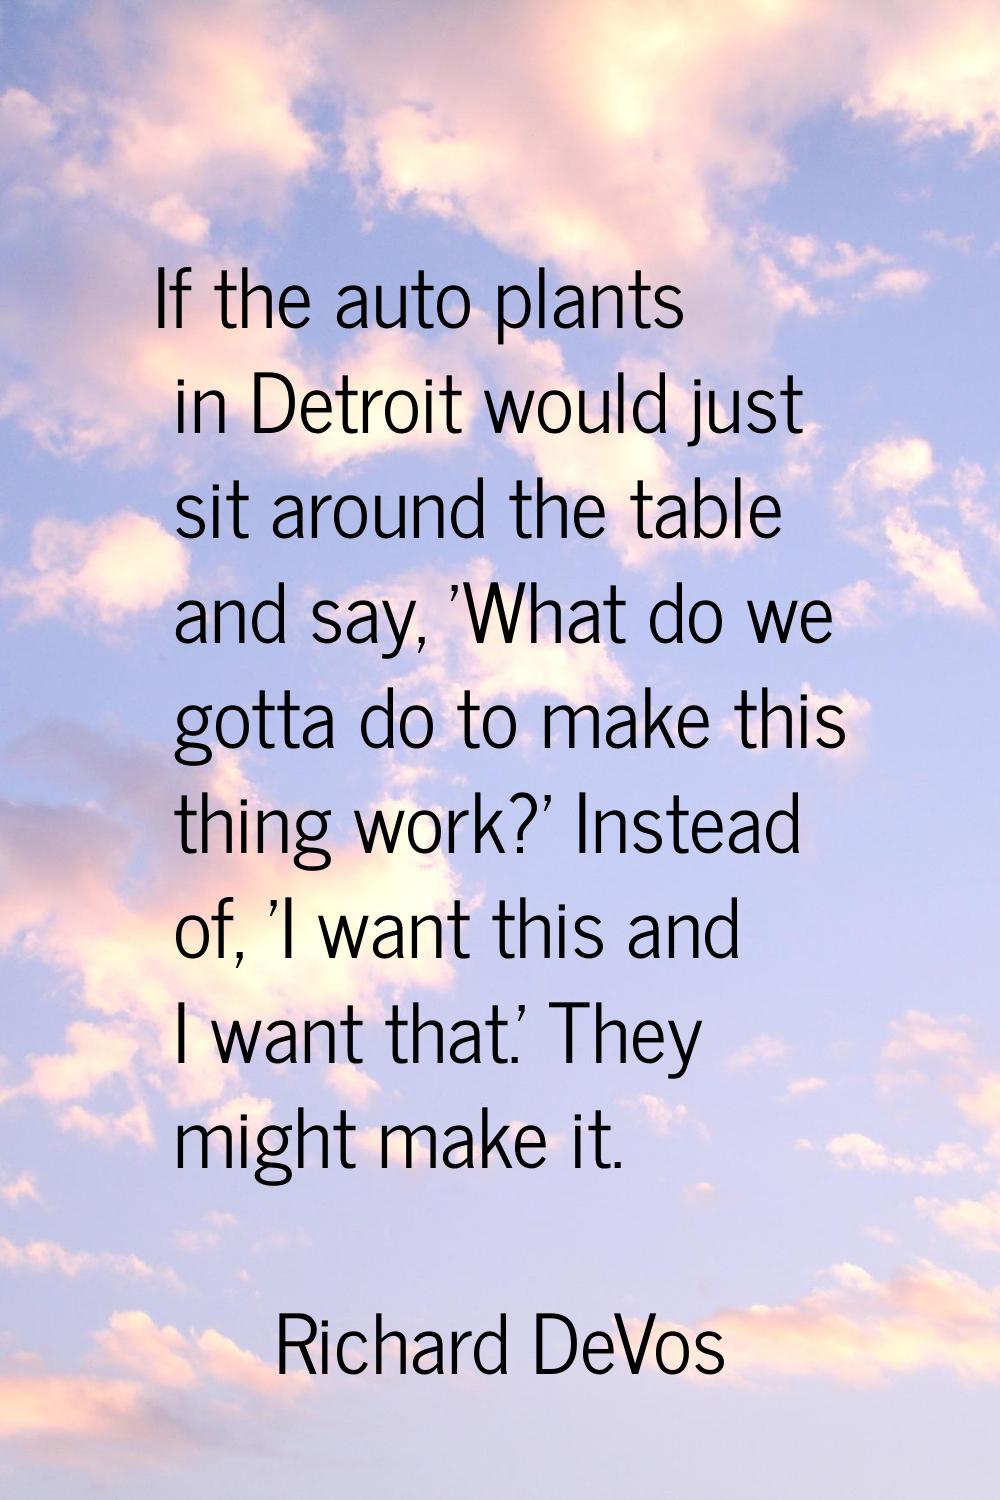 If the auto plants in Detroit would just sit around the table and say, 'What do we gotta do to make